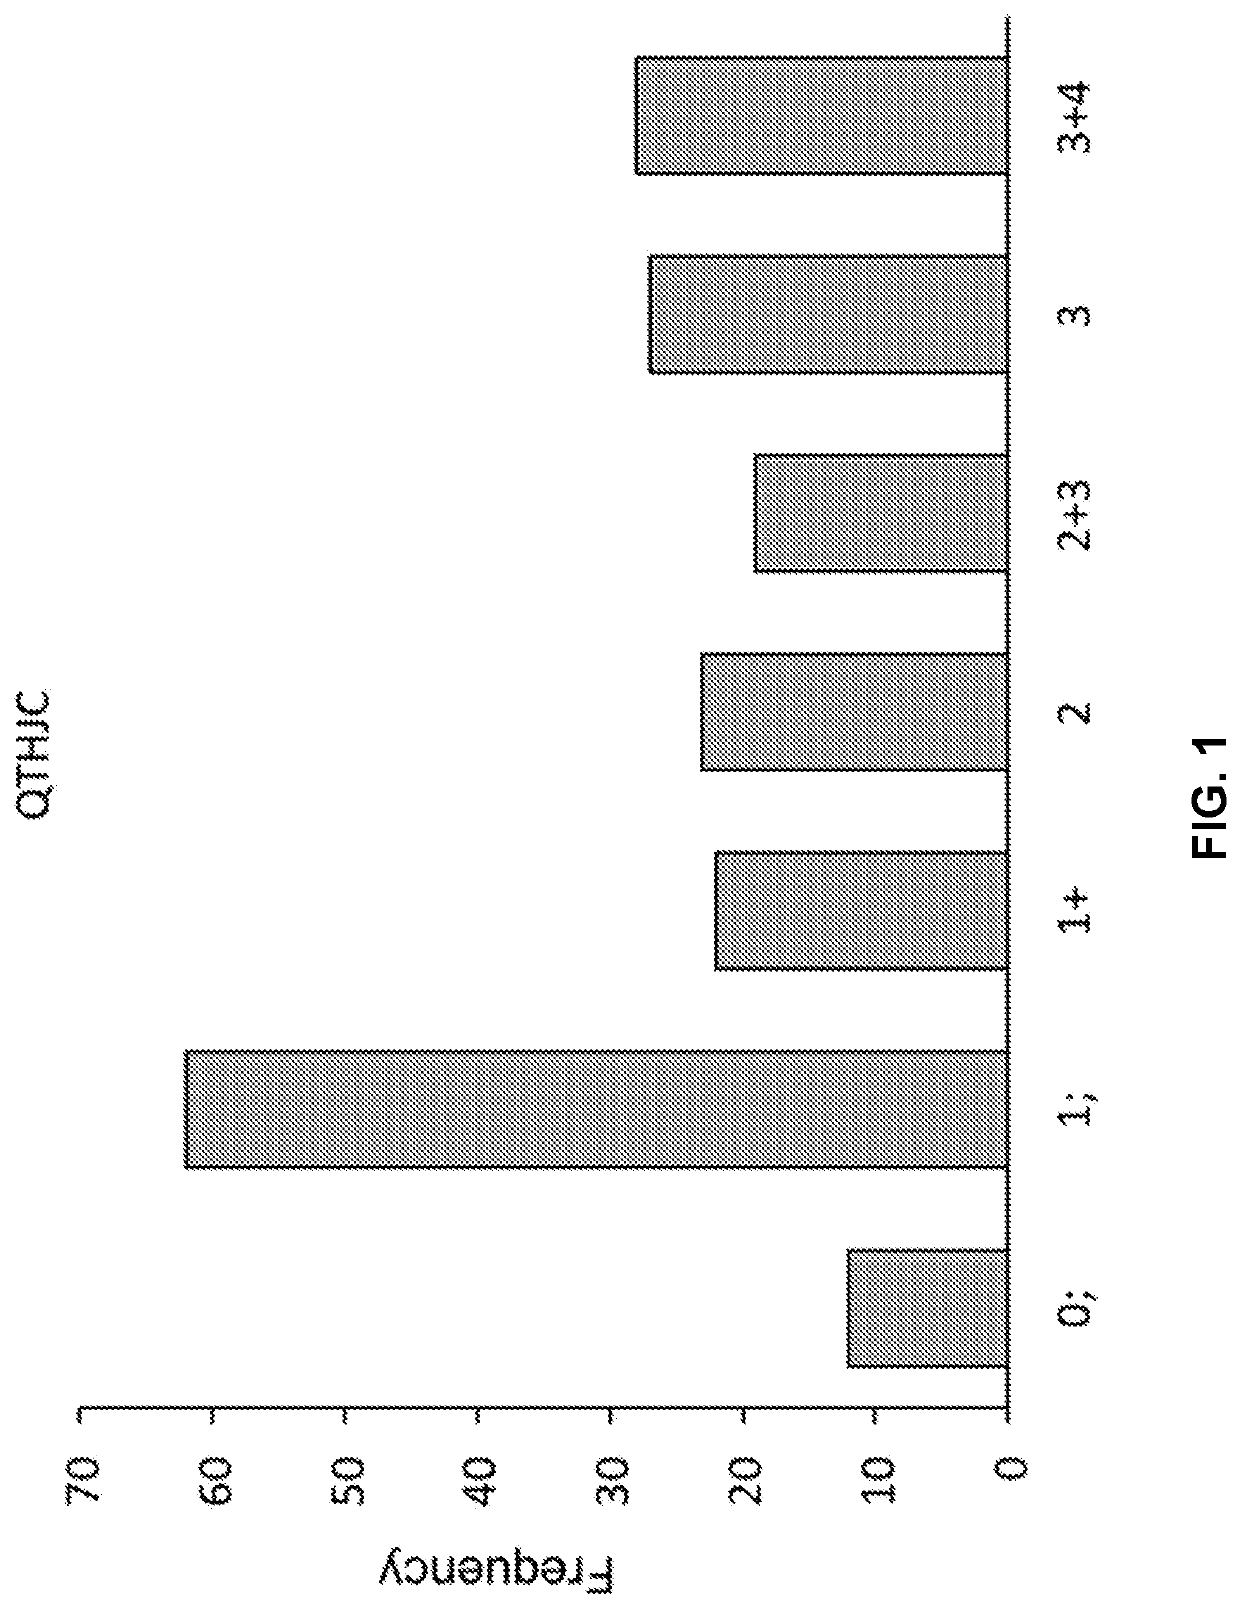 Stem rust resistance genes and methods of use